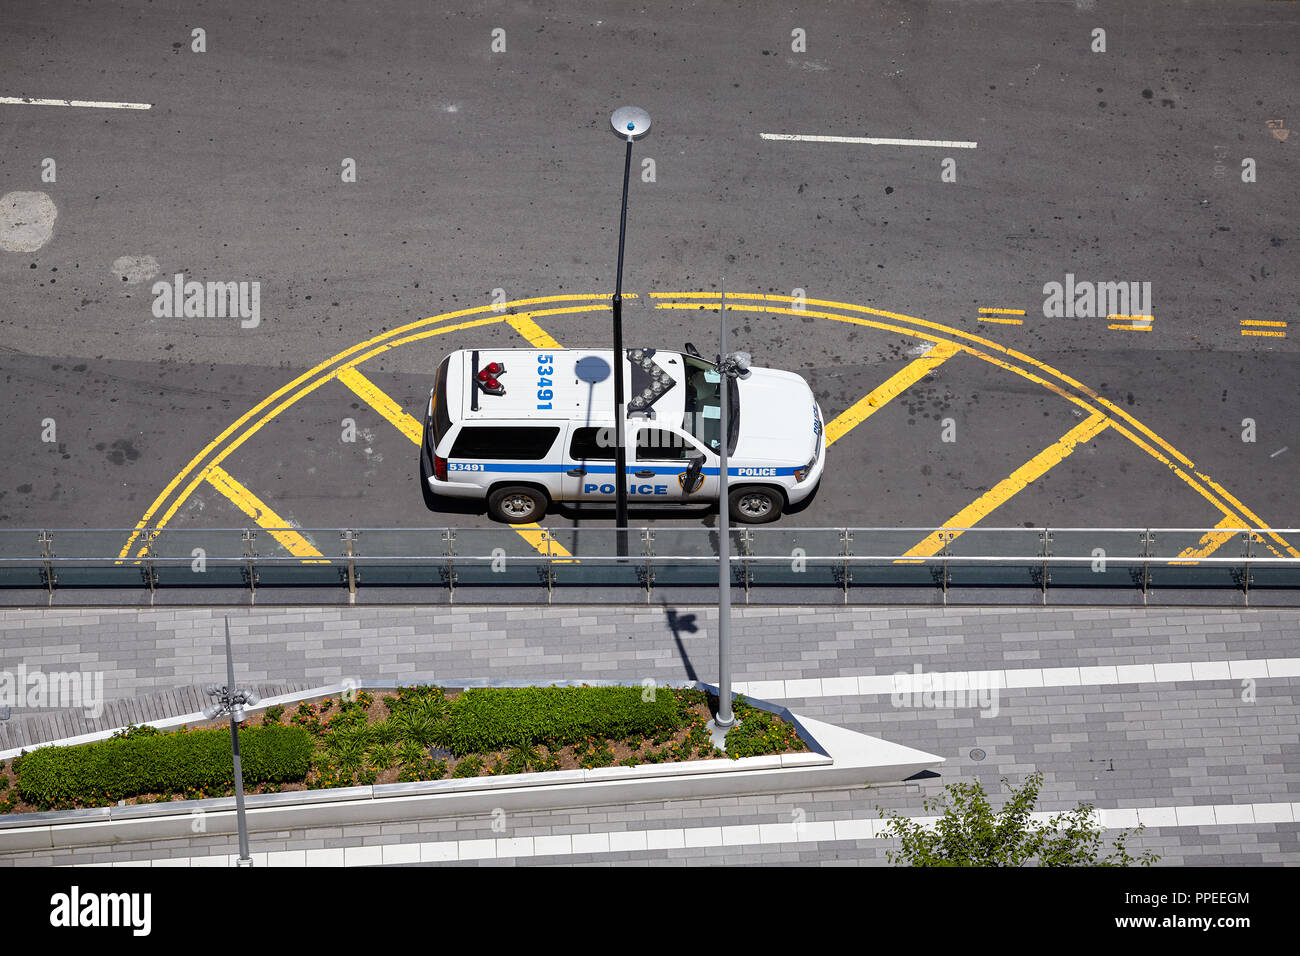 New York, USA - July 05, 2018: Aerial view of a Police vehicle parked on a street in downtown Manhattan. Stock Photo